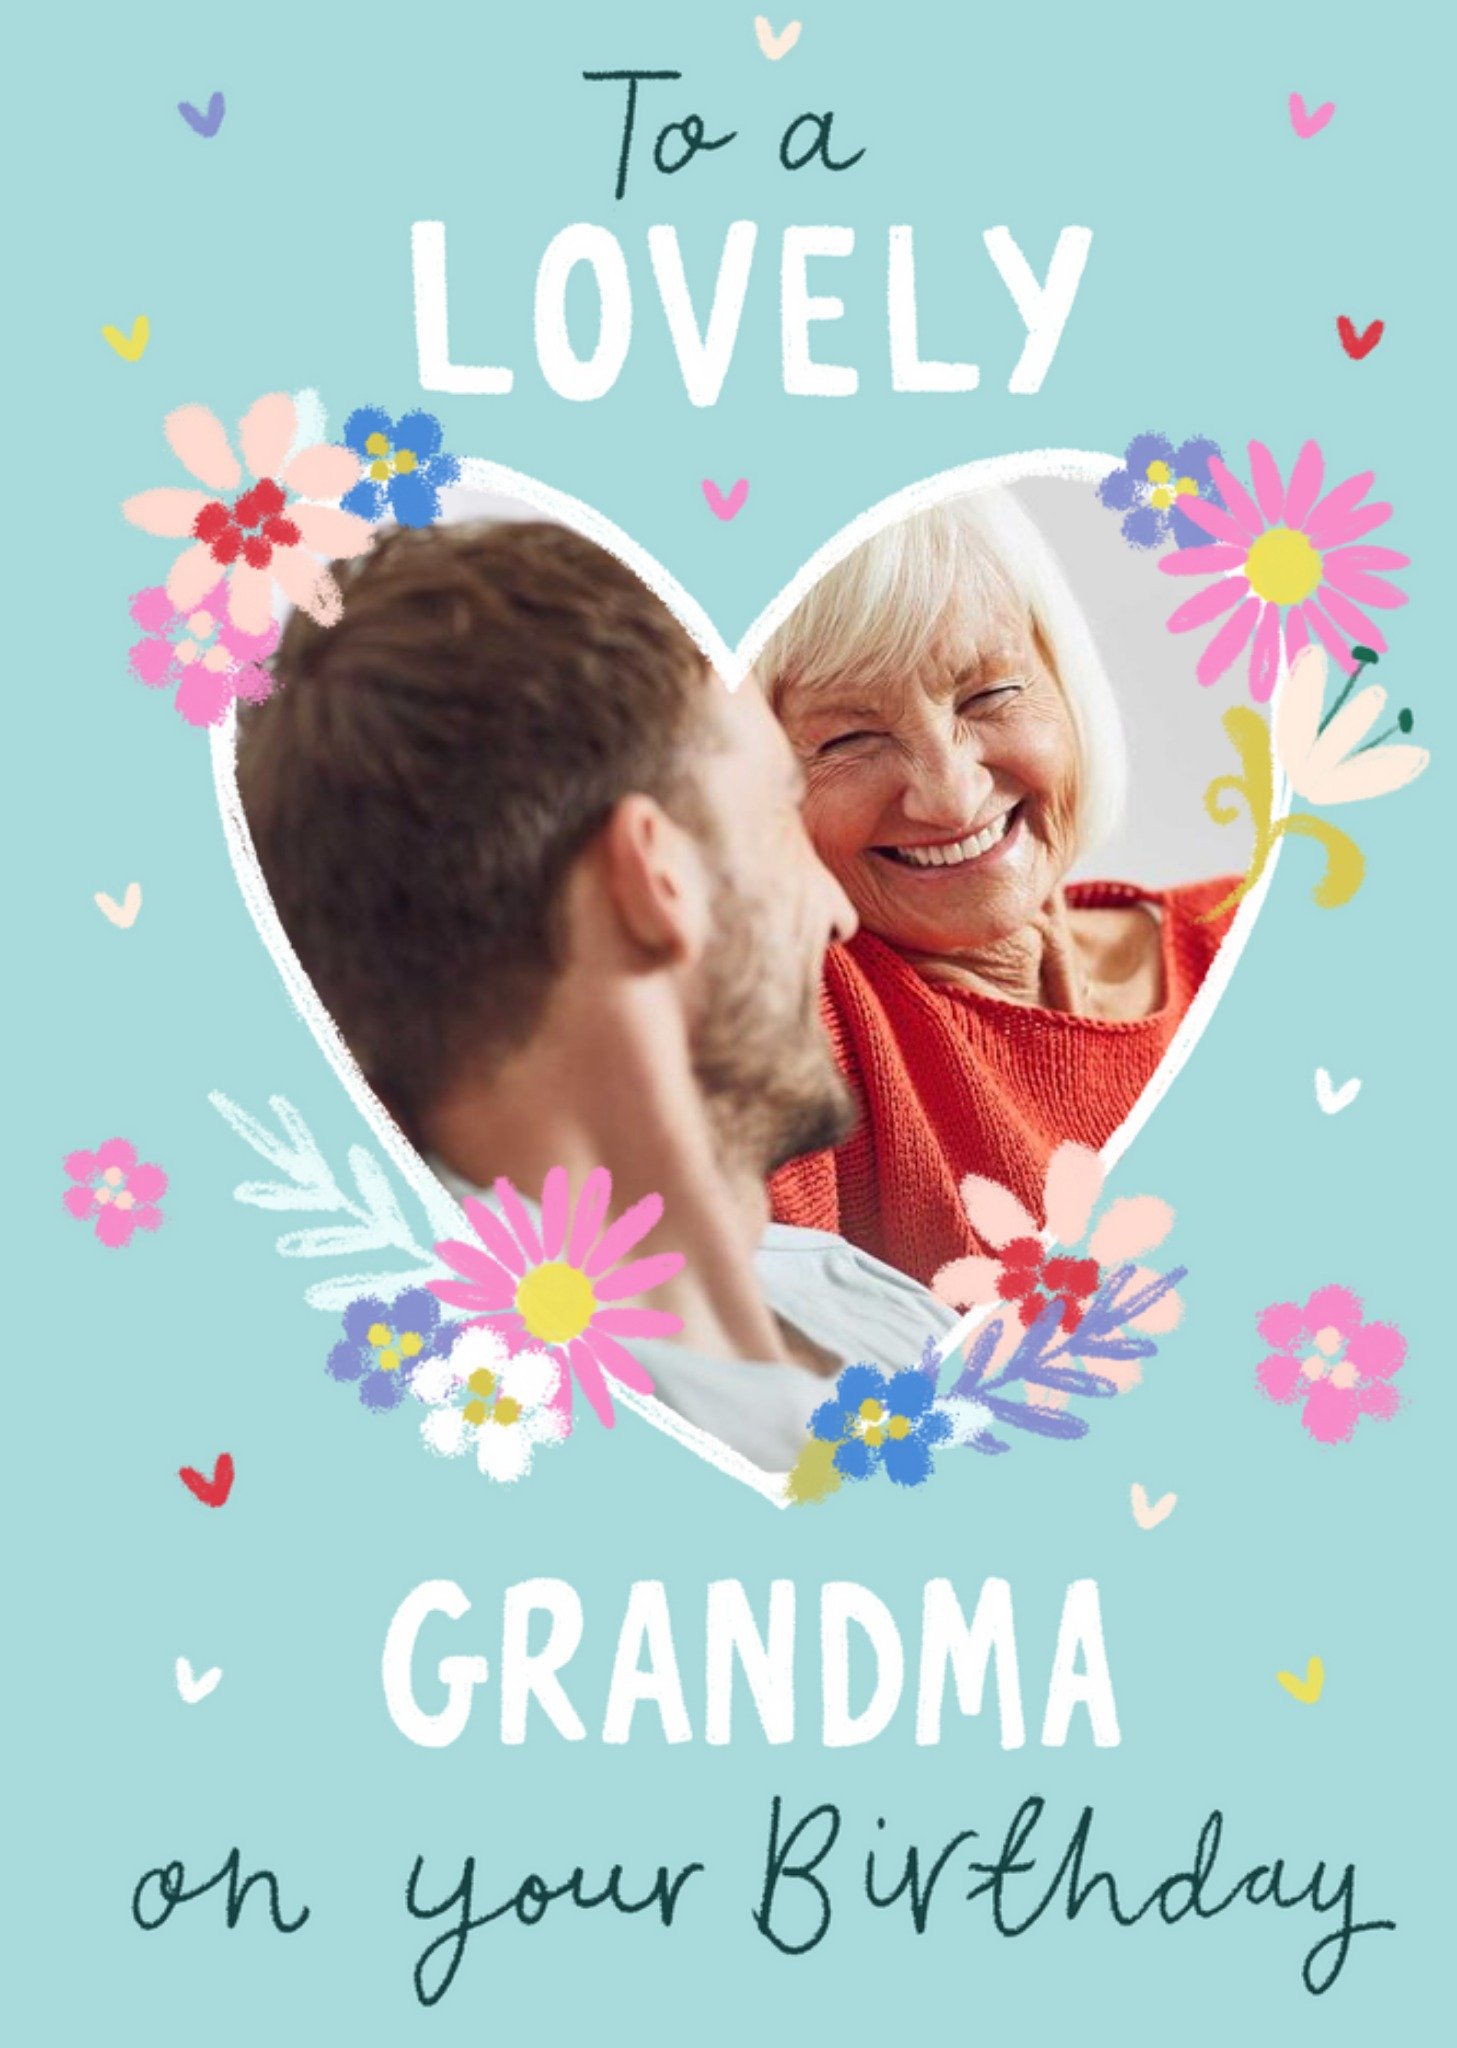 Moonpig Heart Photo Frame Surrounded By Colourful Flowers Lovely Grandma Photo Upload Birthday Card 